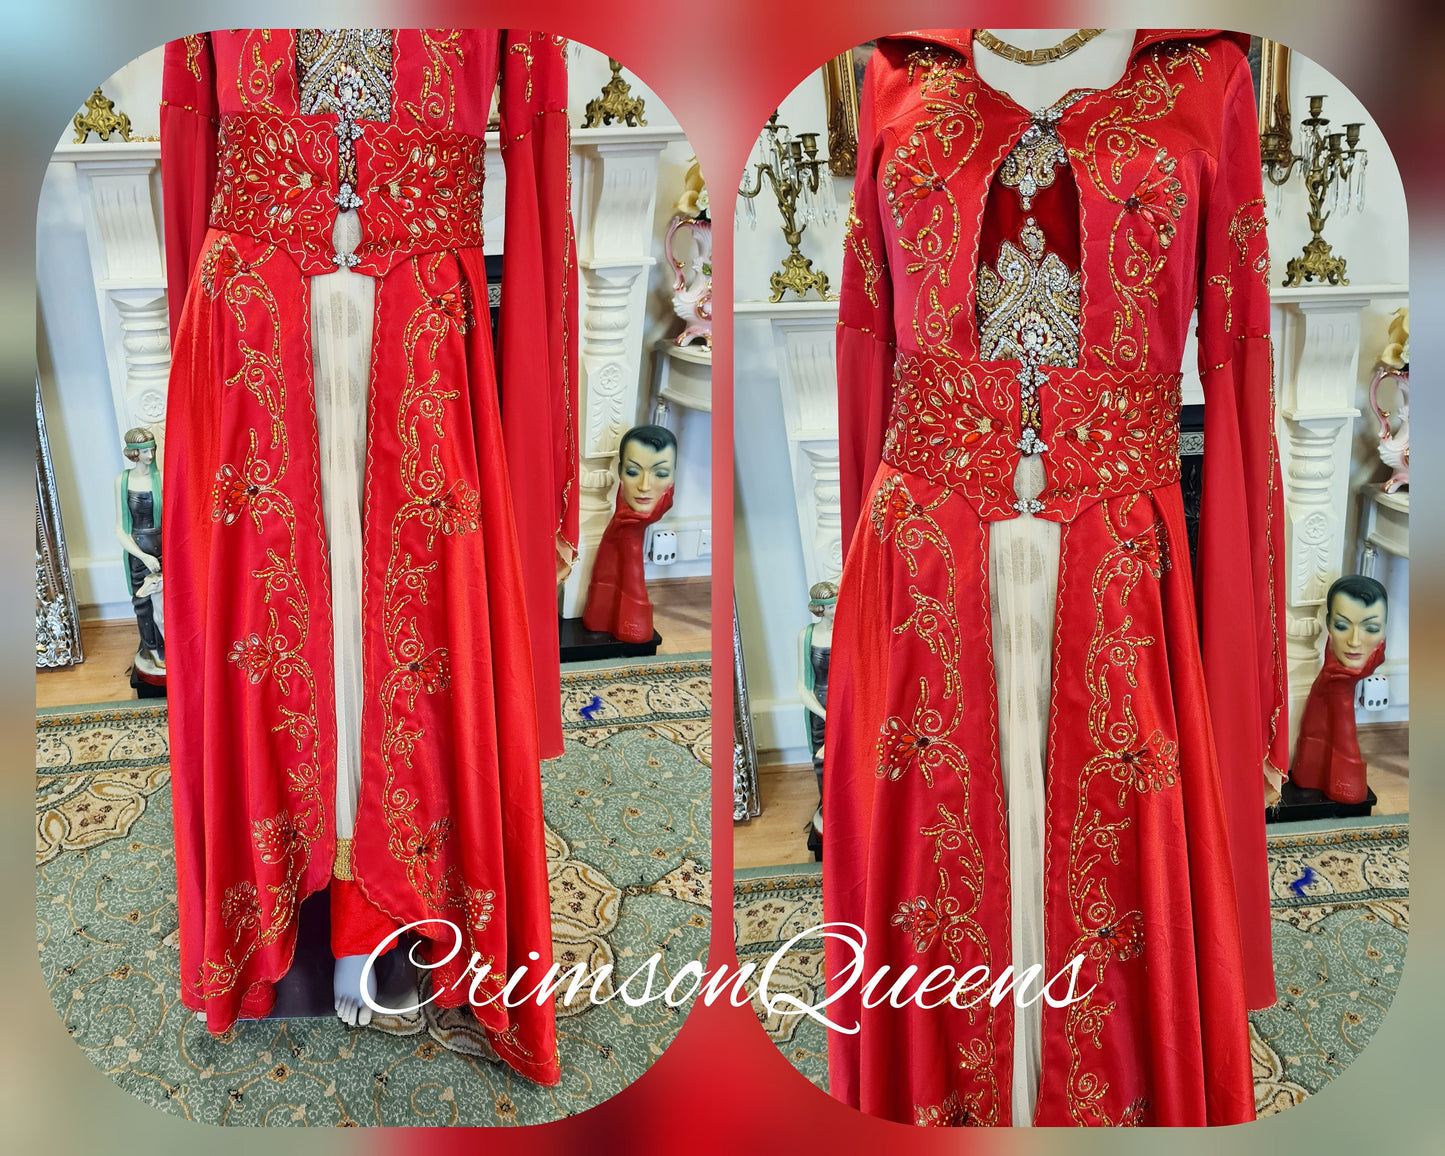 Bohemian romantic gypsy medieval  vintage scarlet red embellished beaded evening ballgown floor dress with matching long coat size UK 8 US 4